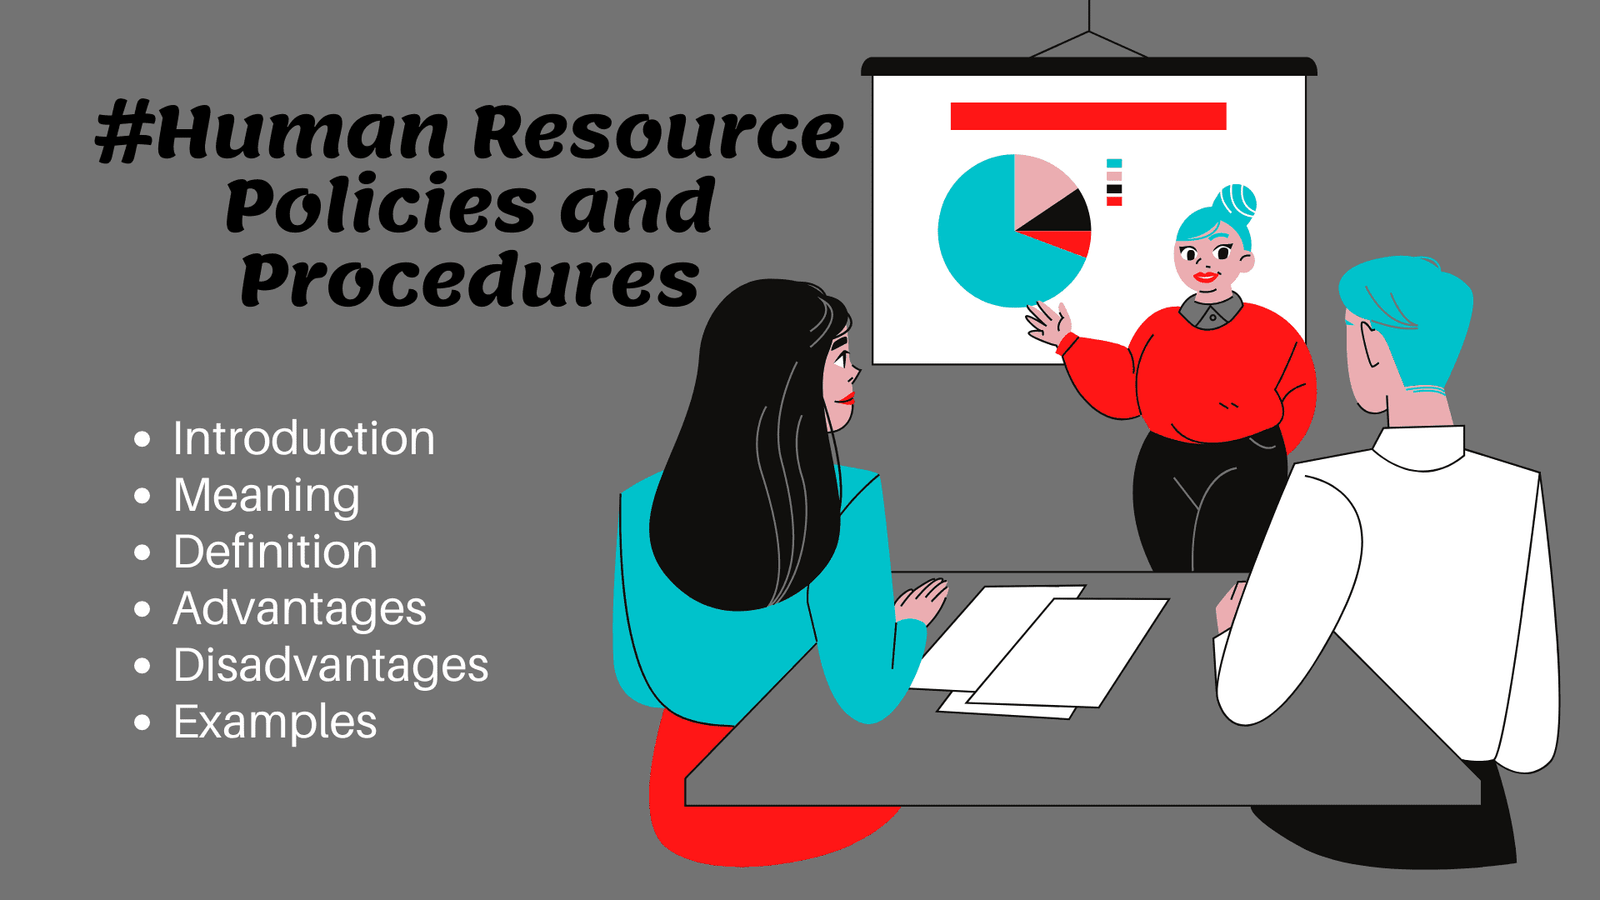 What are the Human Resource Policies and Procedures Image